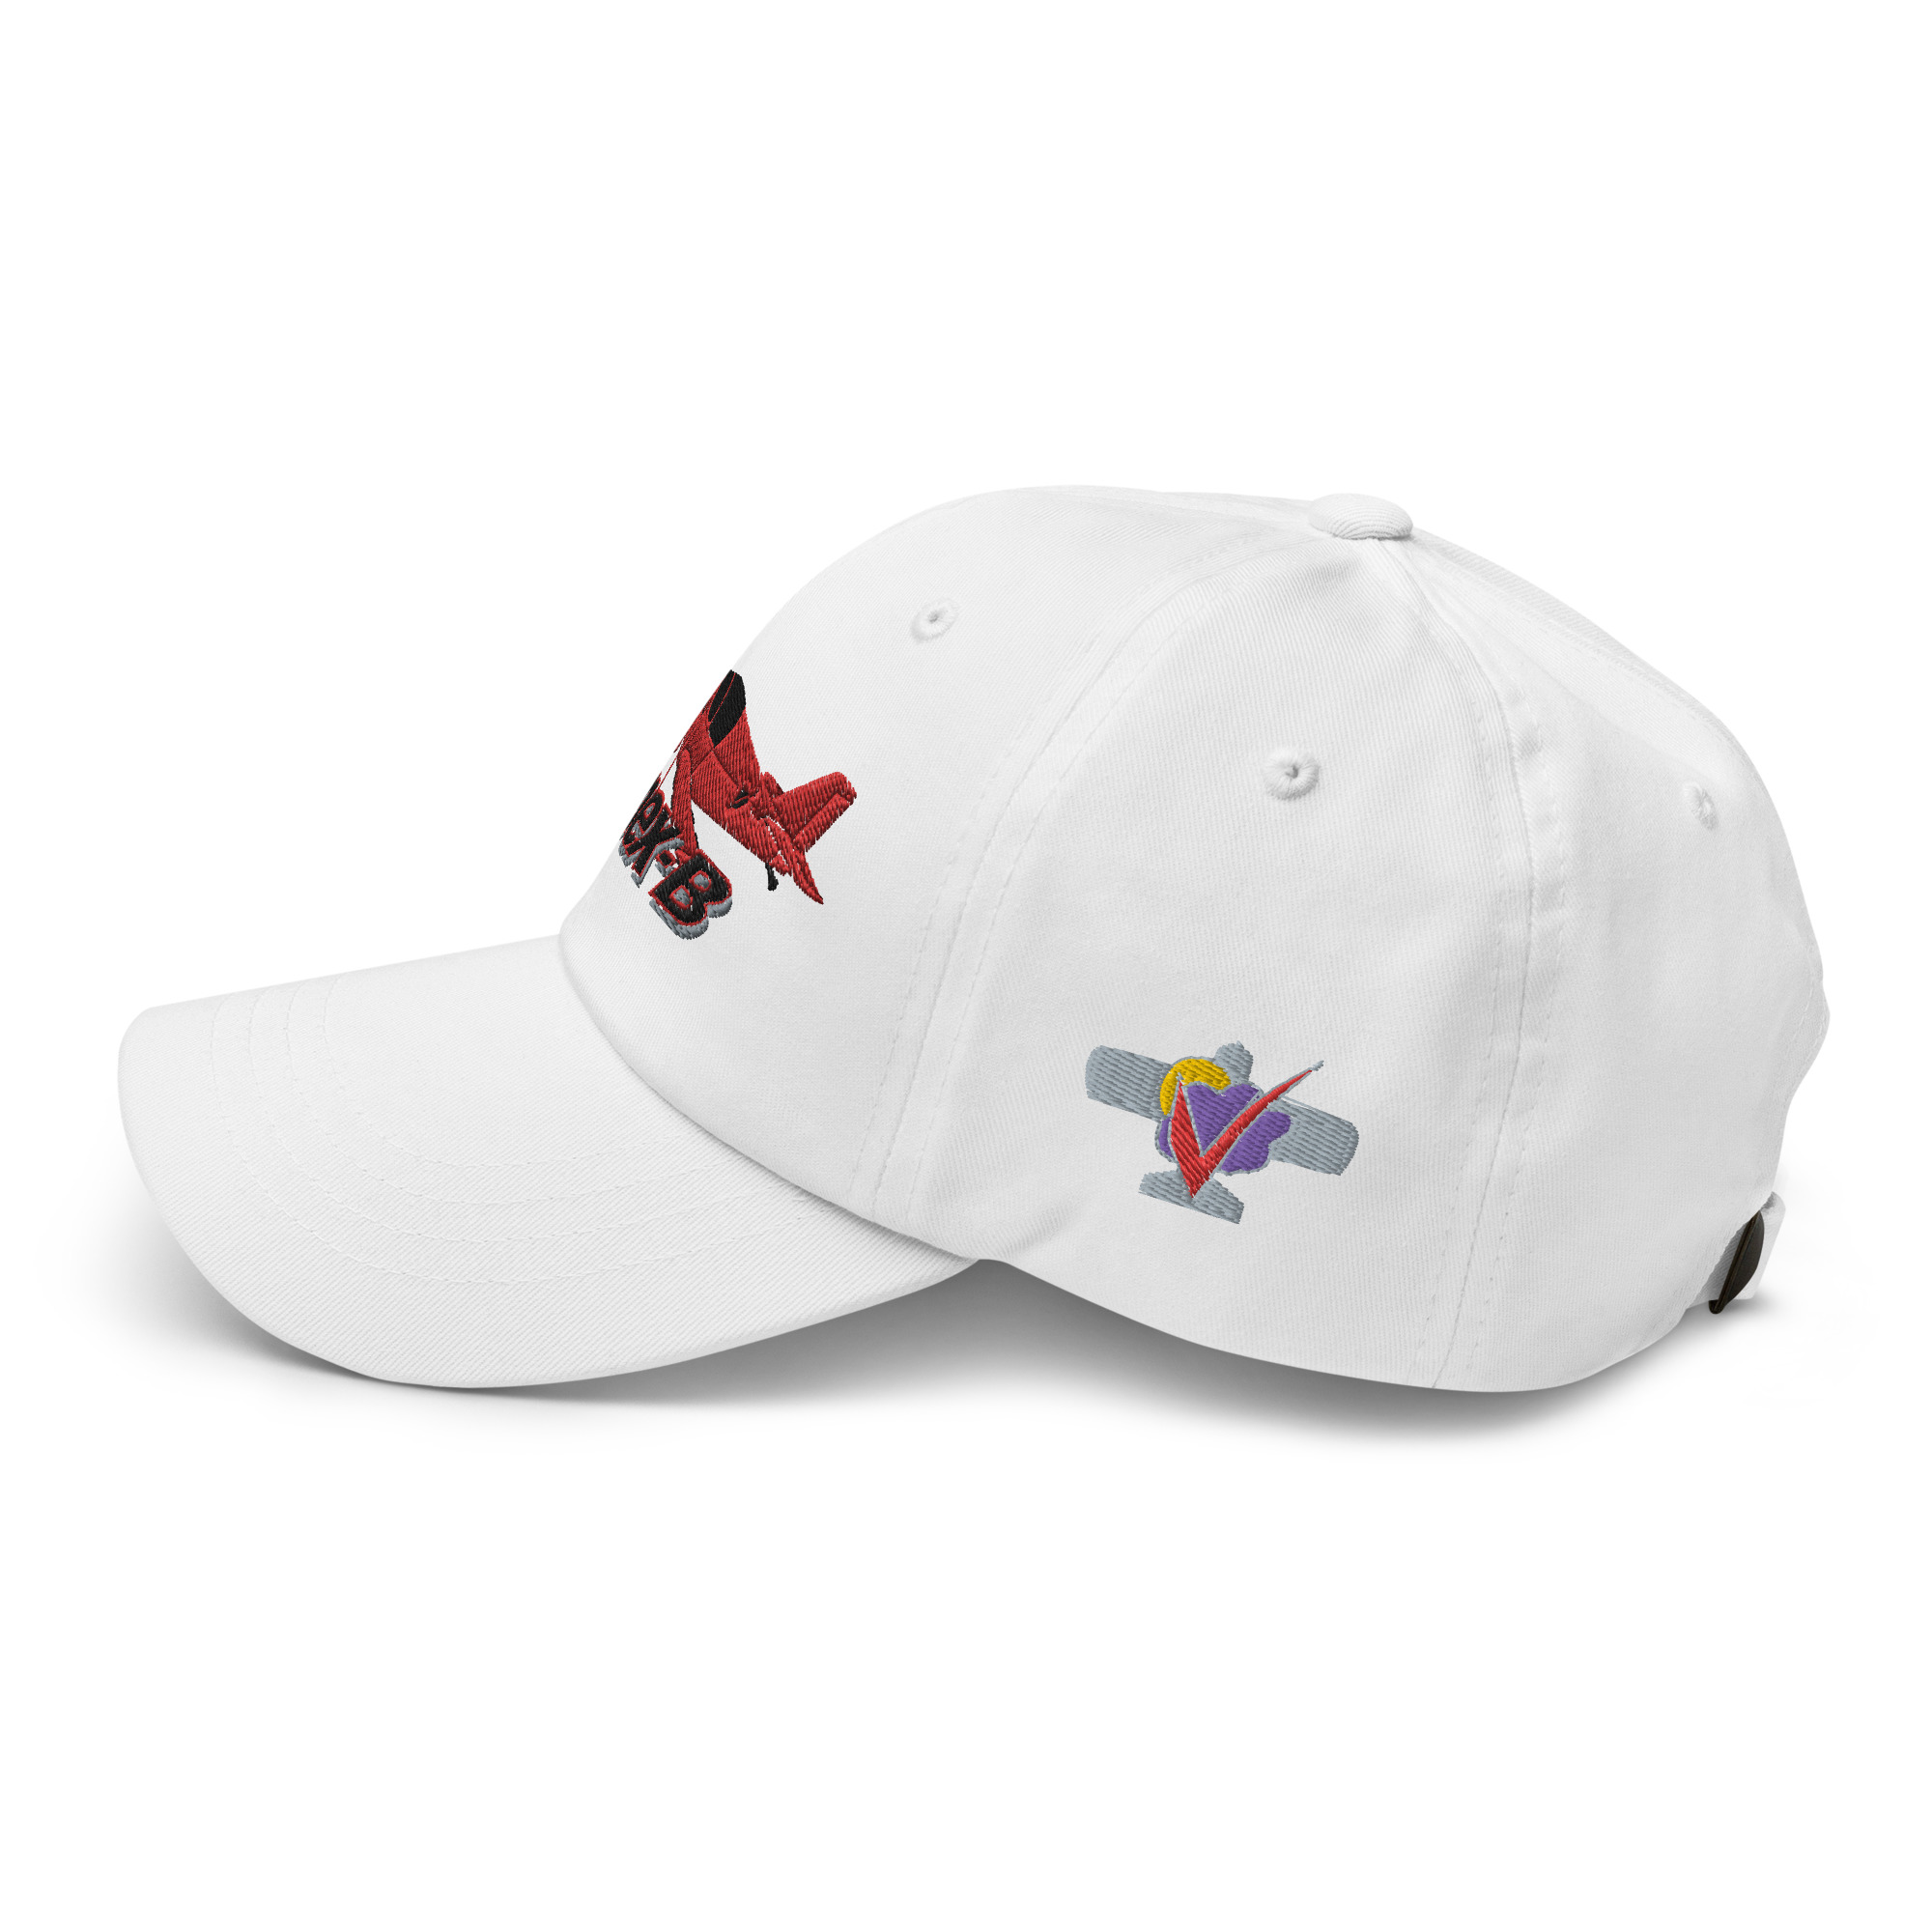 classic-dad-hat-white-left-side-656e4425a84ad.jpg